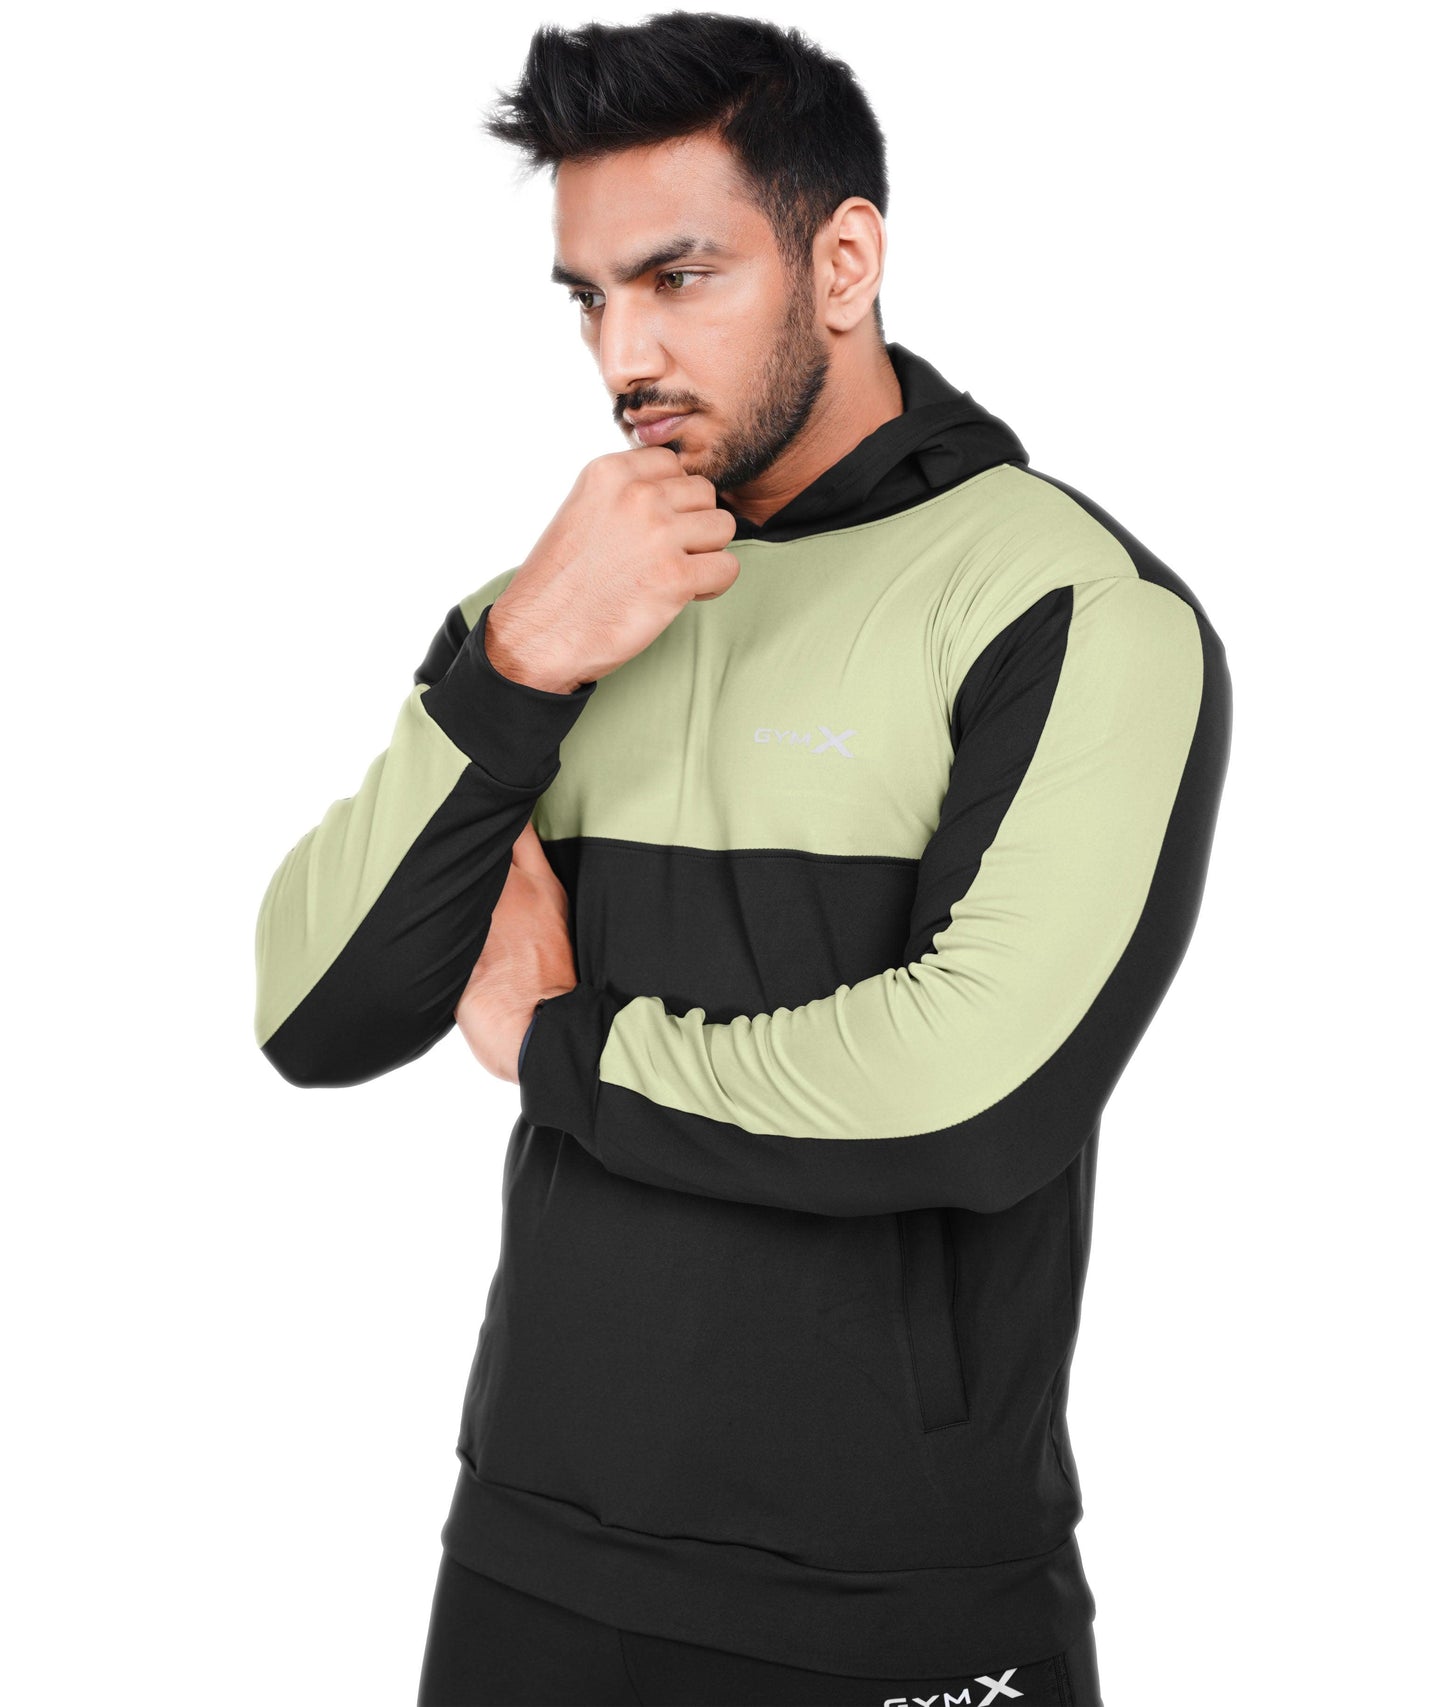 Dual Edition GymX Pullover: Pista Green- SALE